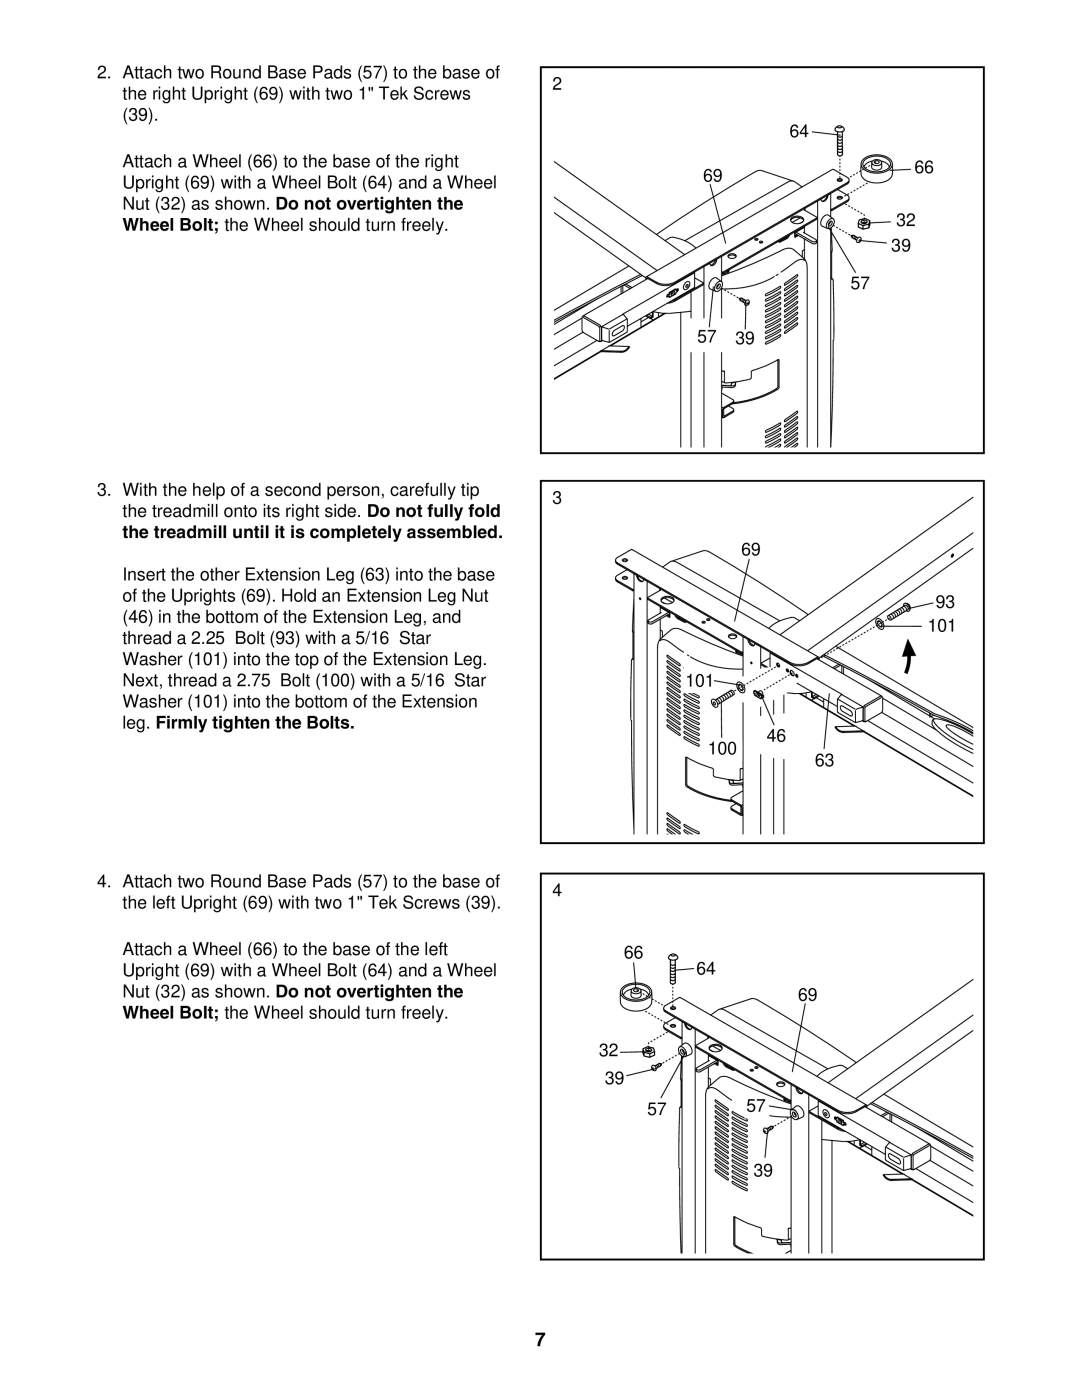 ProForm 831.24623.0 user manual Nut 32 as shown. Do not overtighten, Treadmill until it is completely assembled 